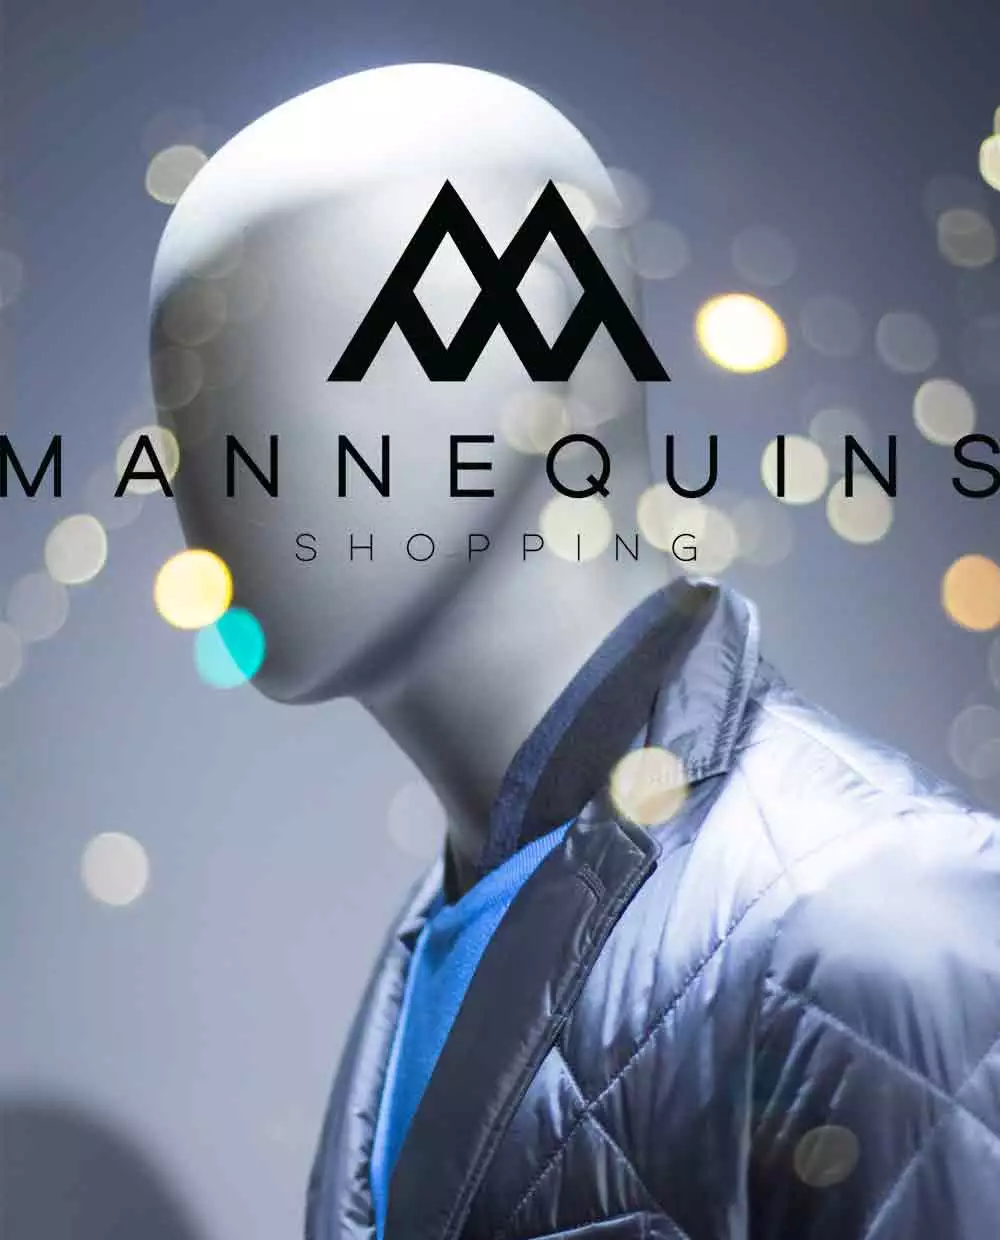 Mannequins Shopping